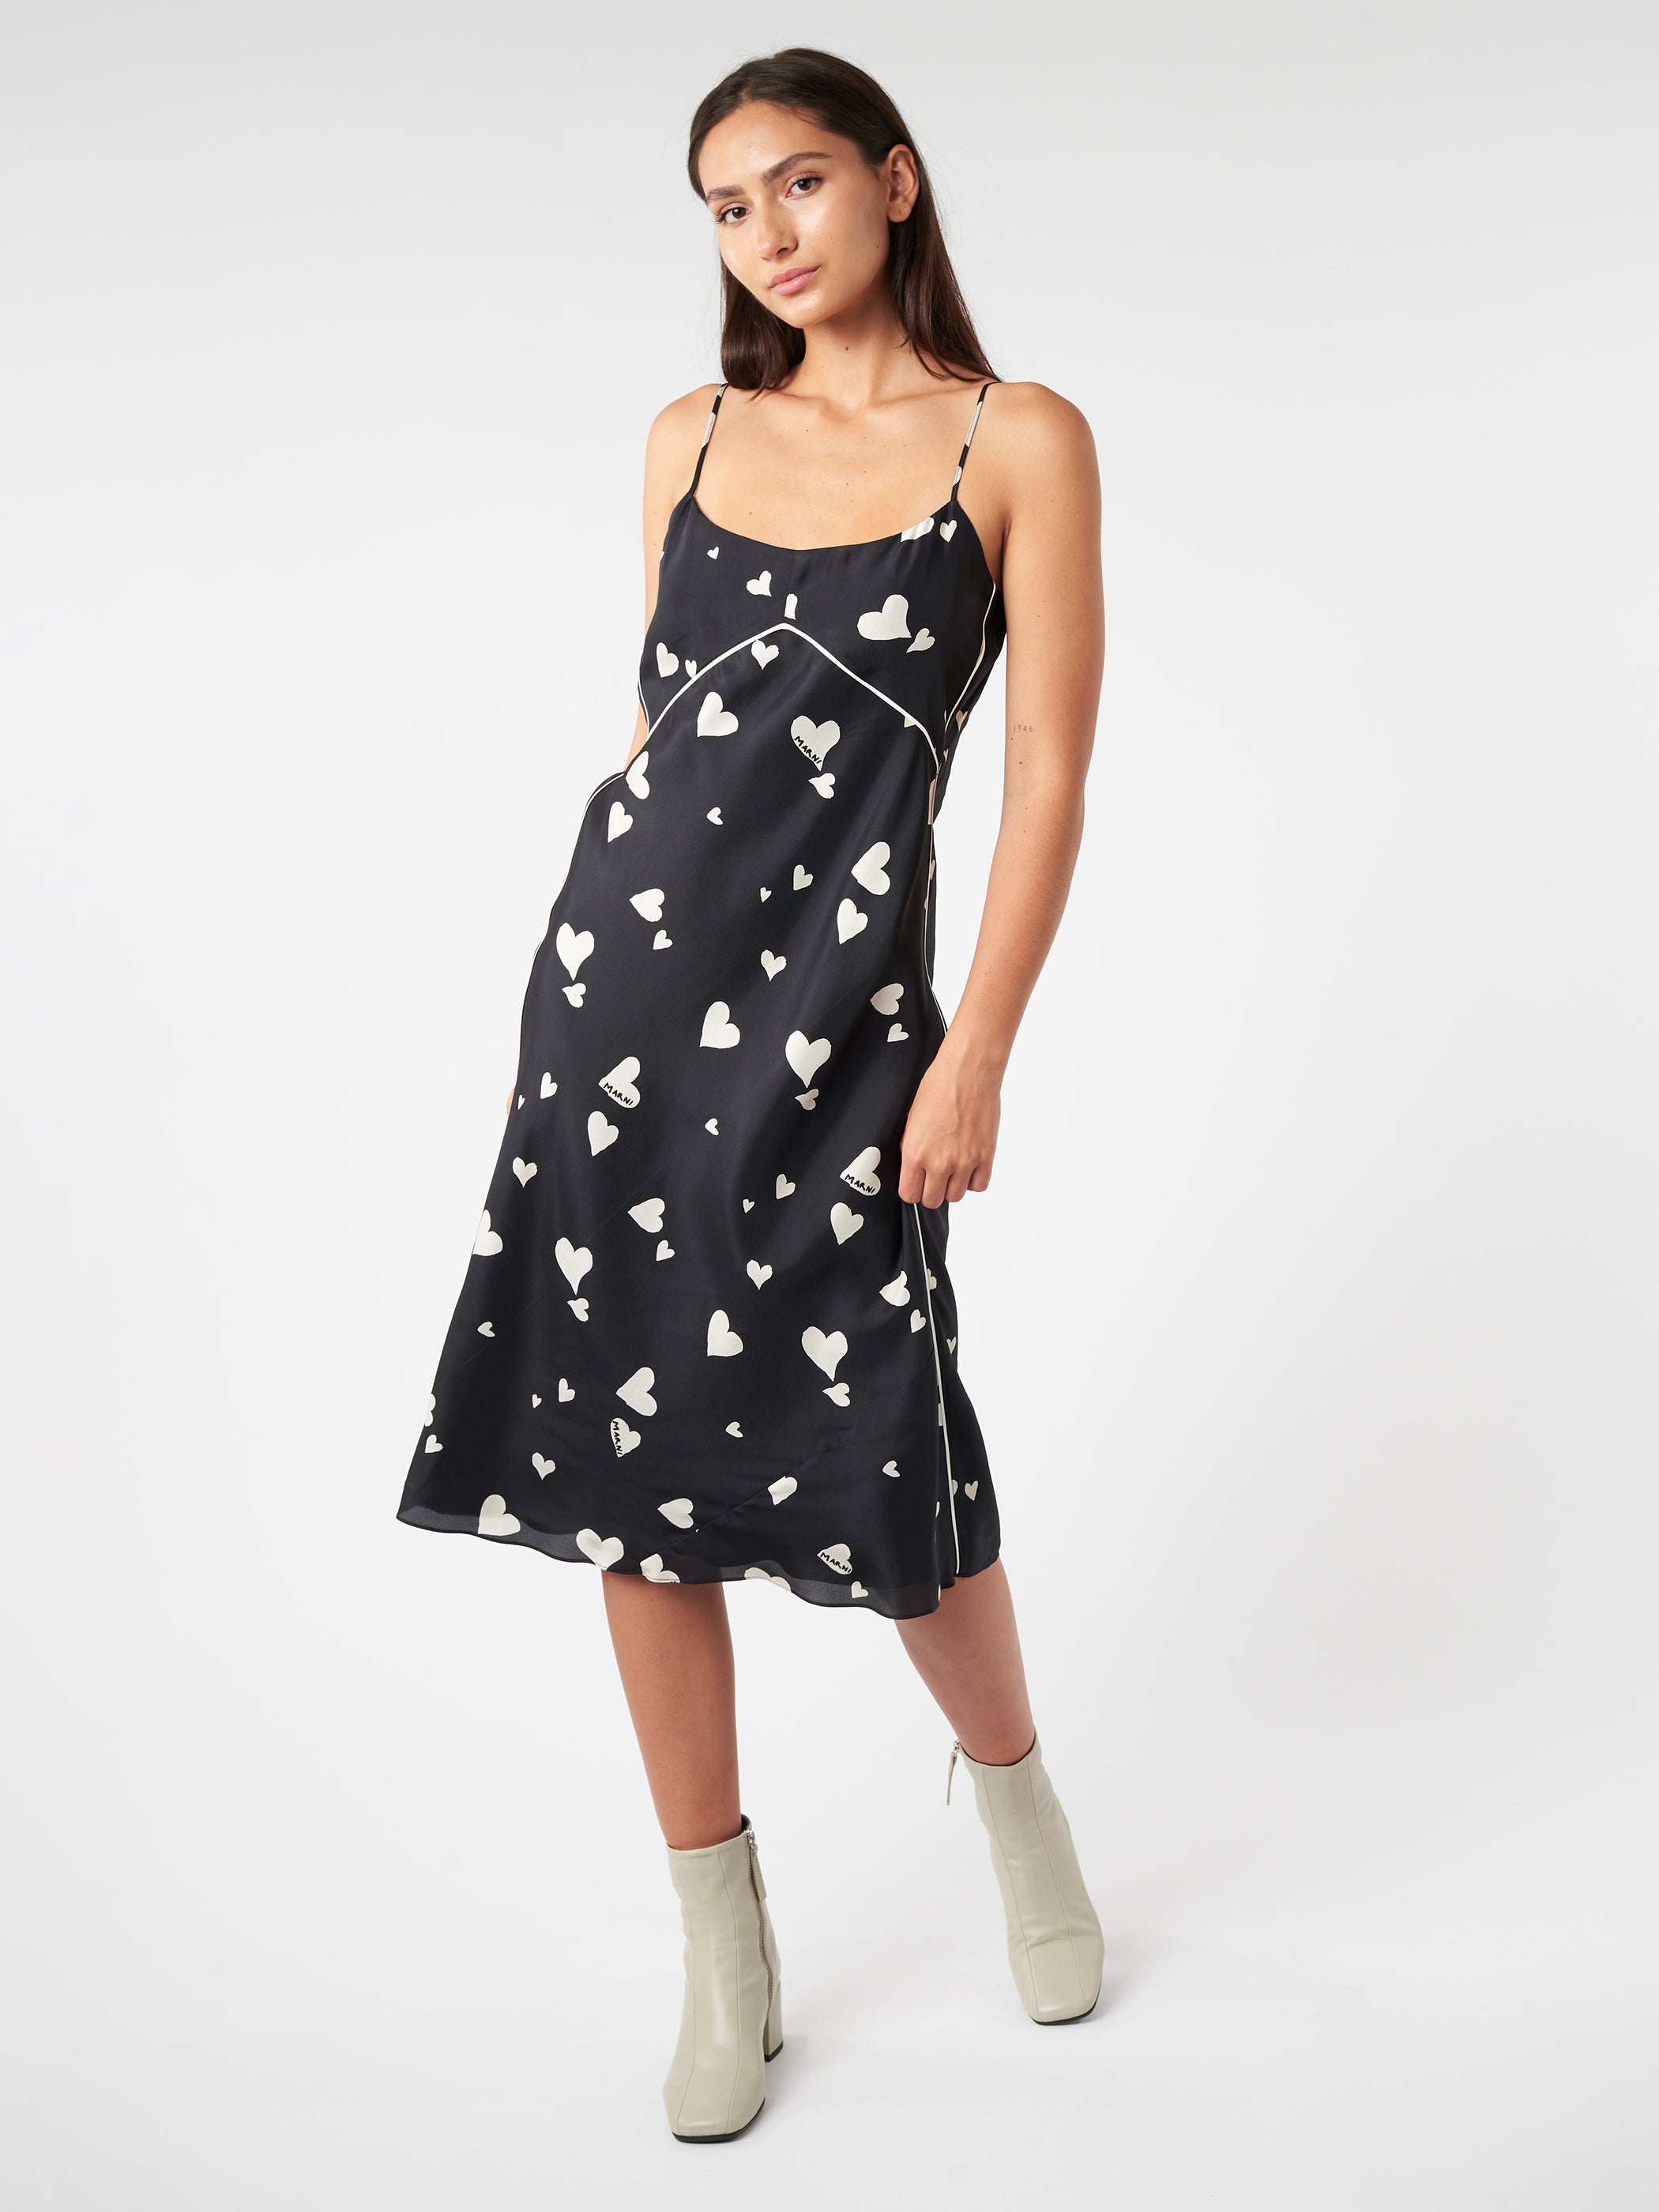 Silk Slip Dress With Bunch Of Hearts Print